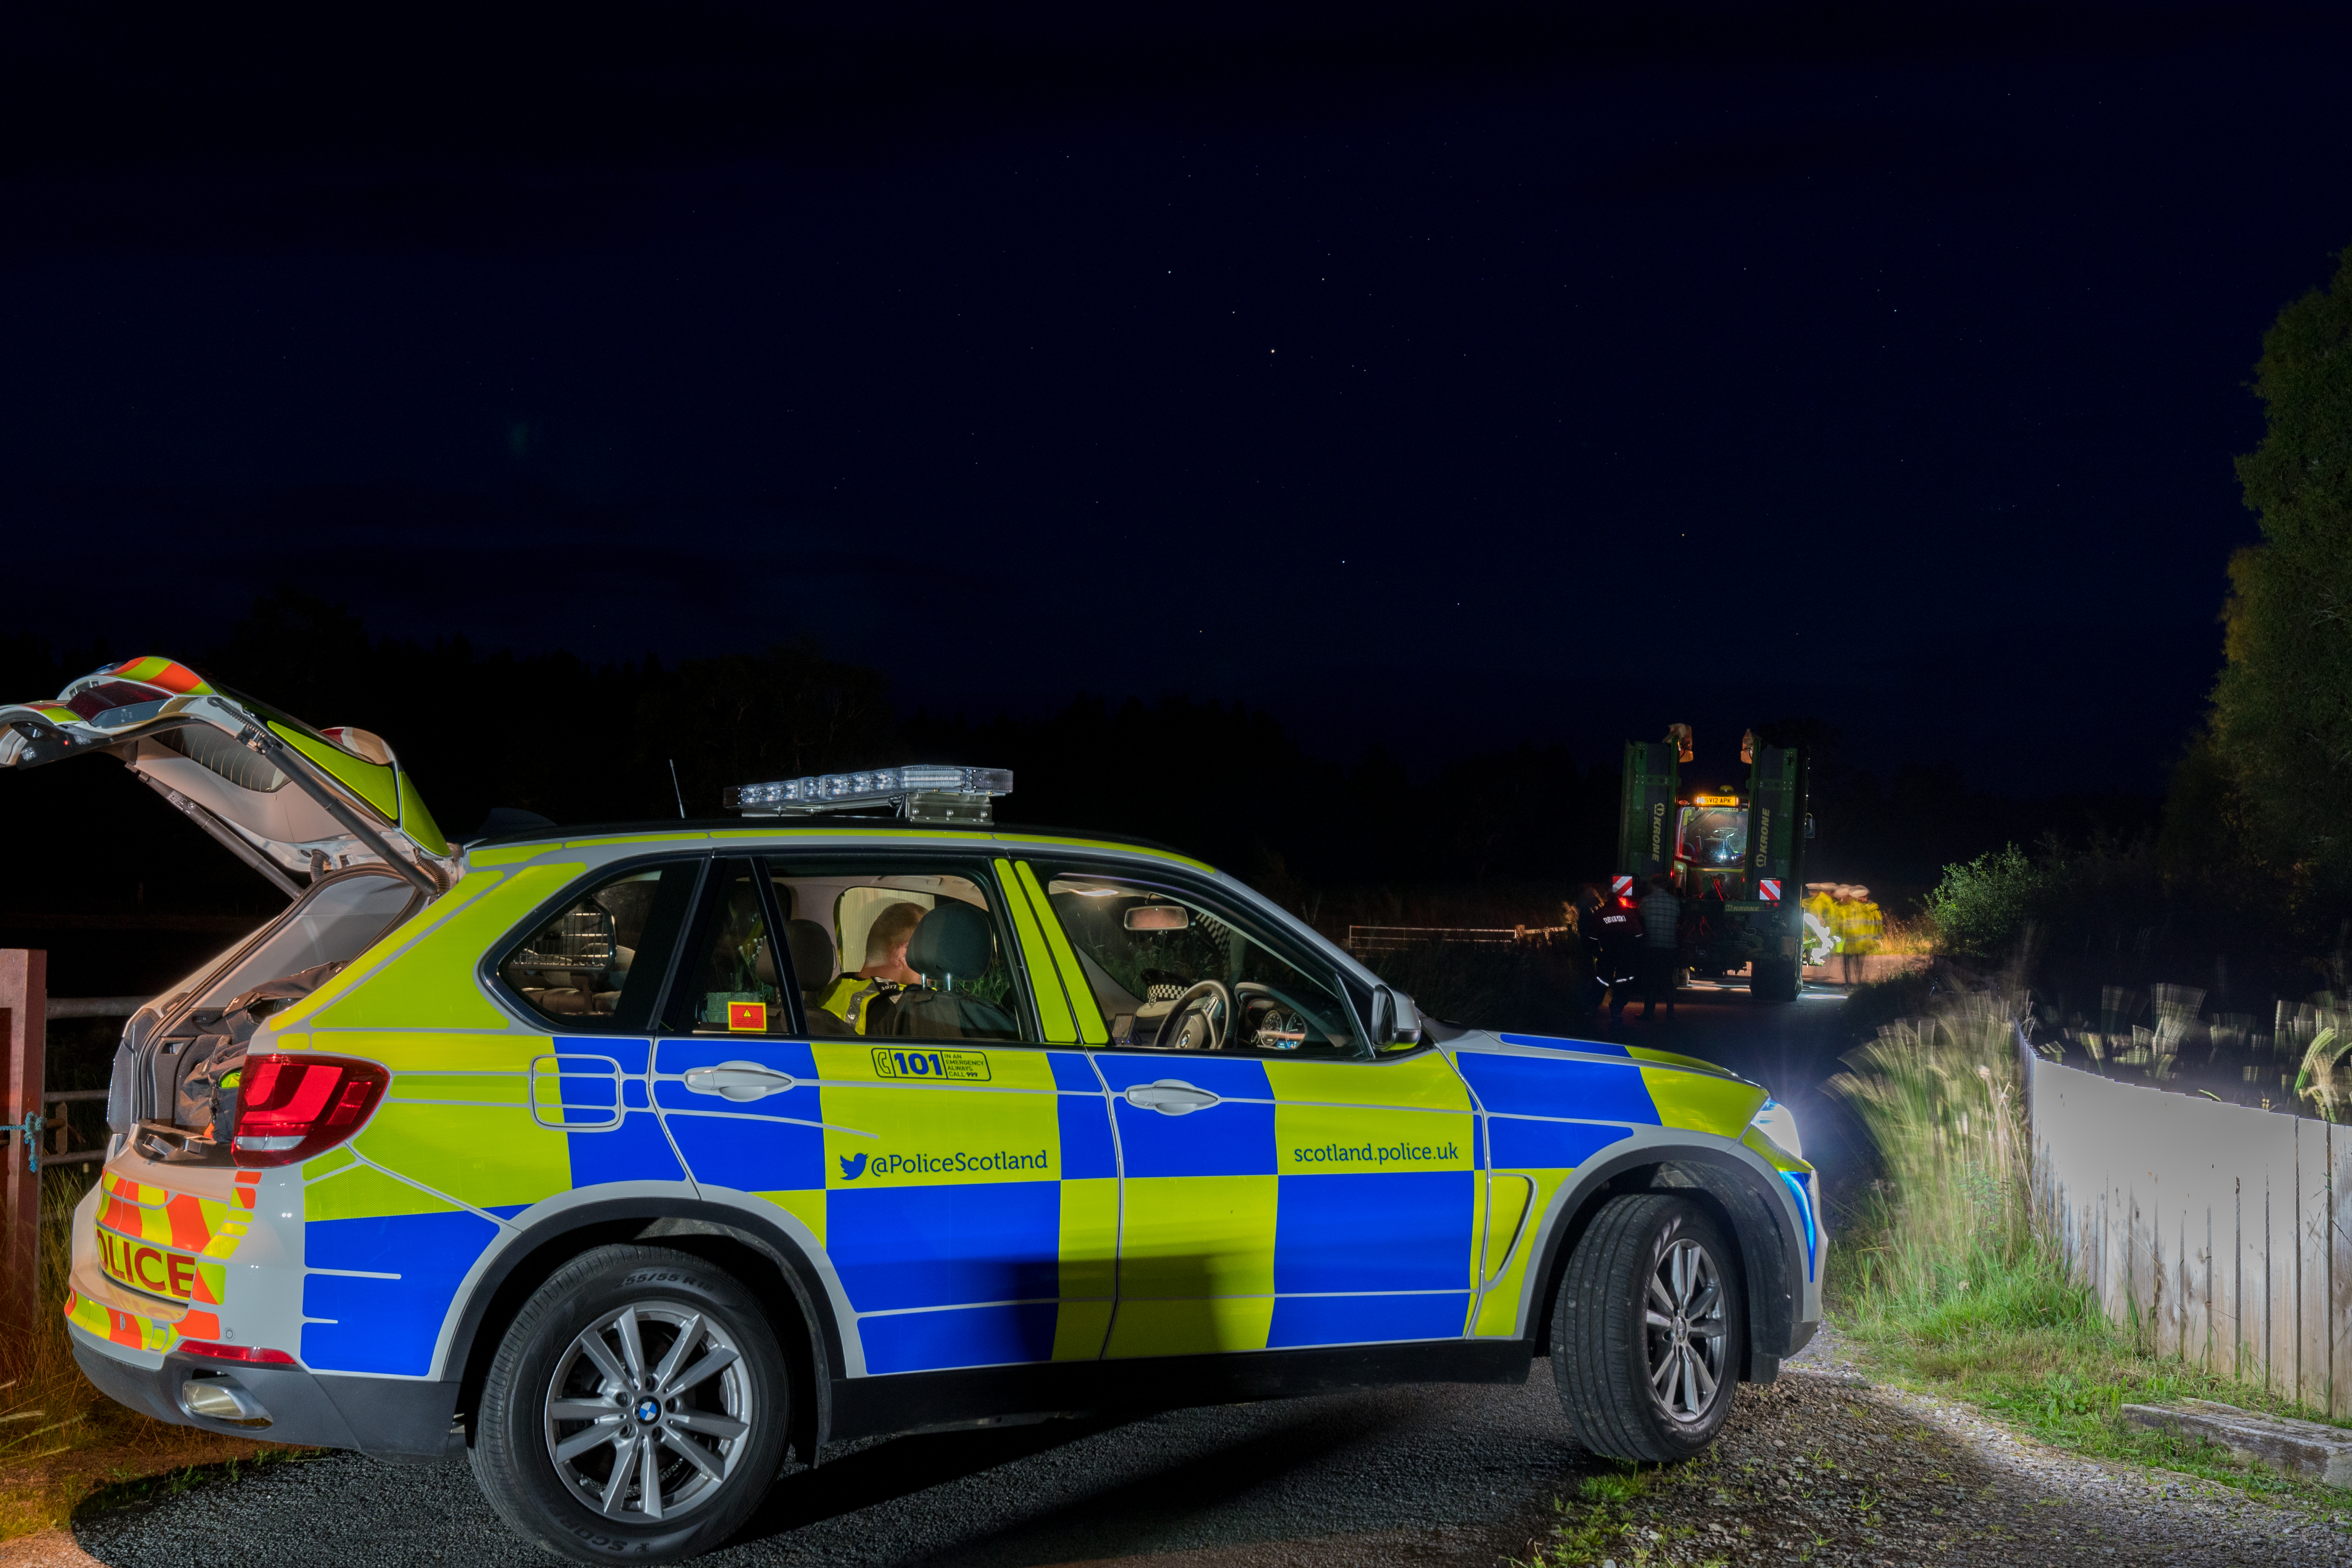 22 August 2019. Carr Road, Carrbridge, Highlands, Scotland, UK. This is the scene of the RTC involving Cyclist and Tractor.